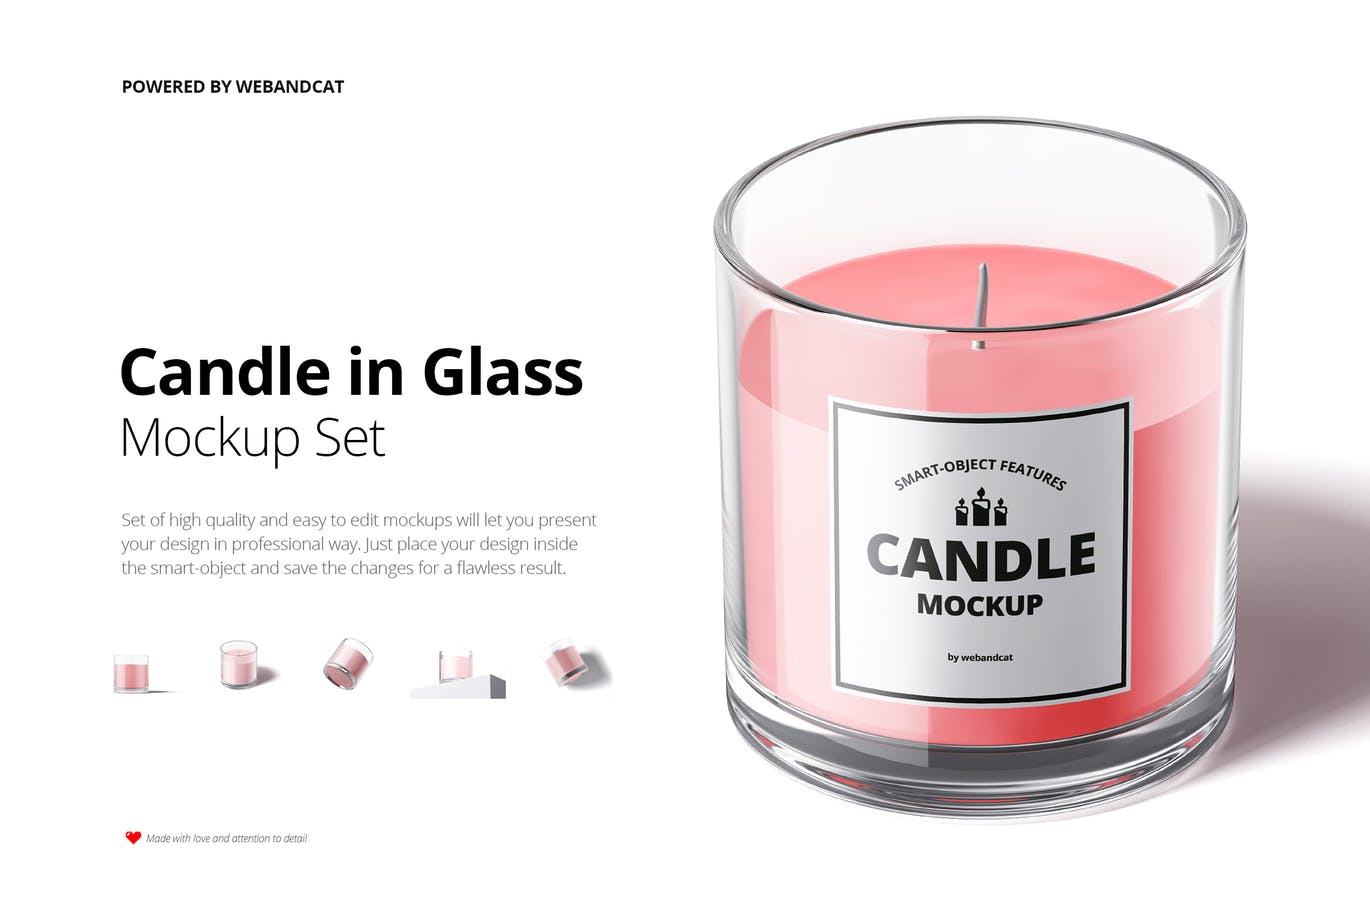 Candle in glass mockup set